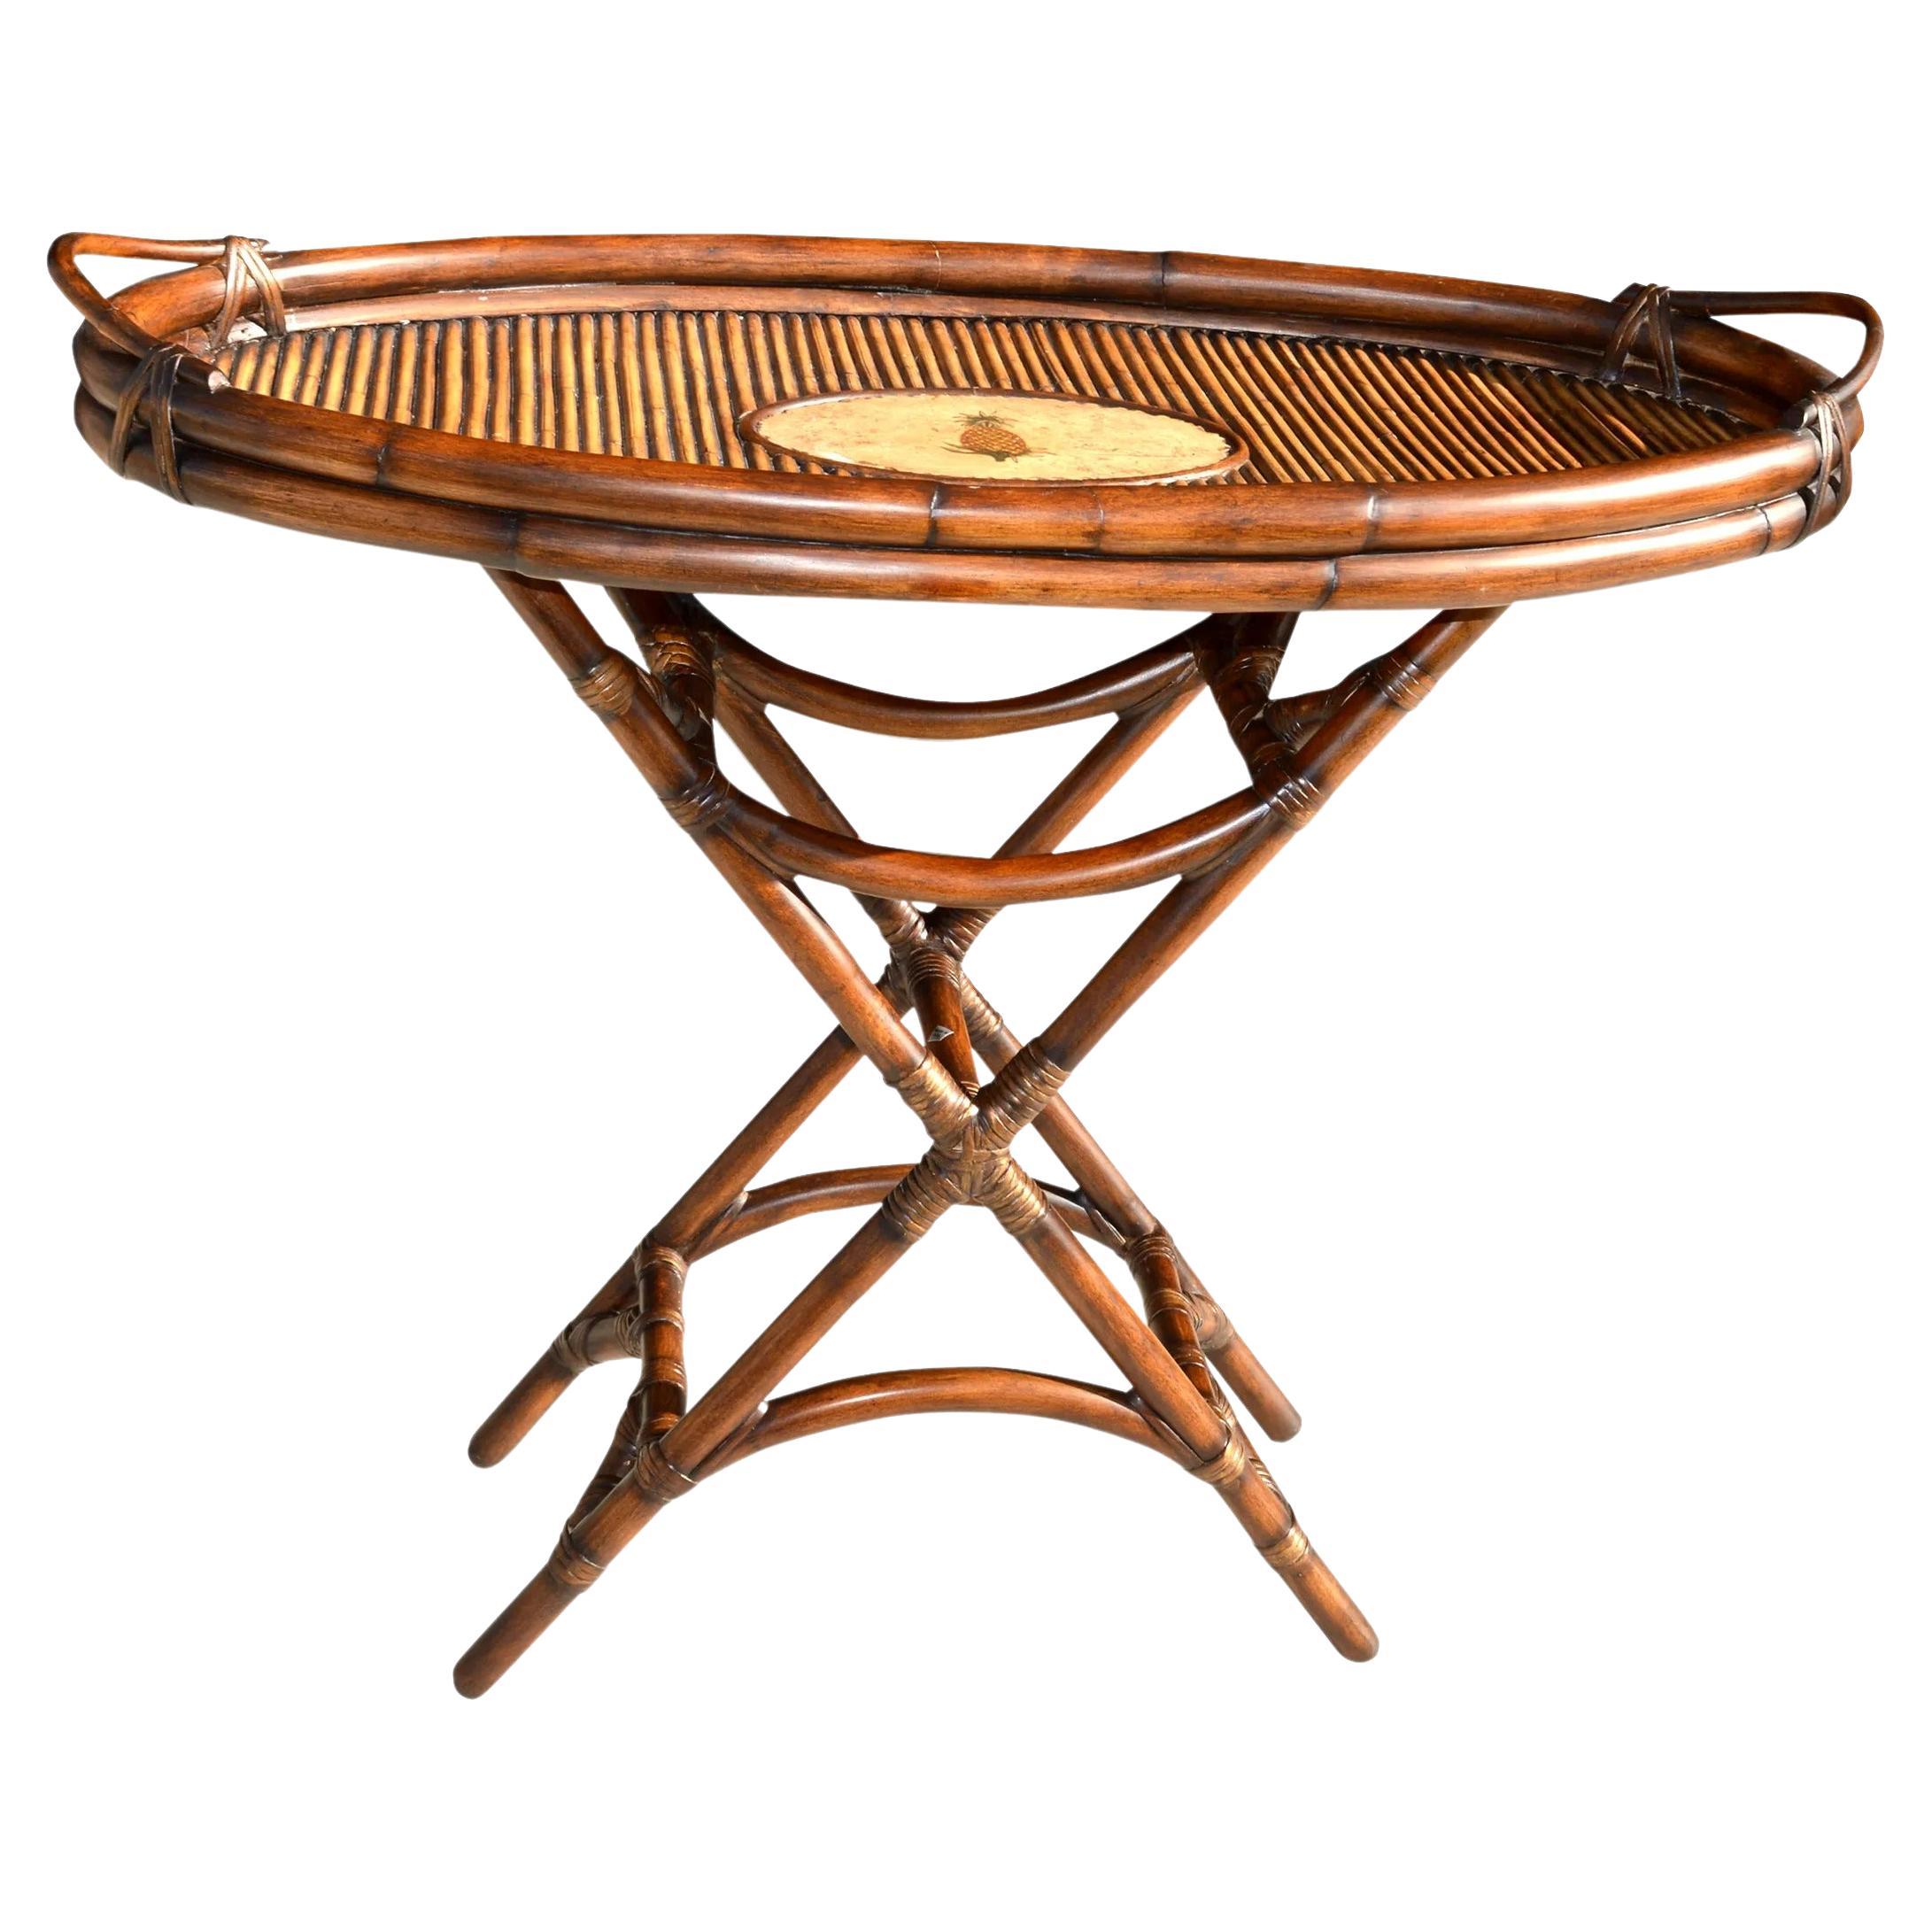 British Colonial Style Cane and Bamboo Tray Table